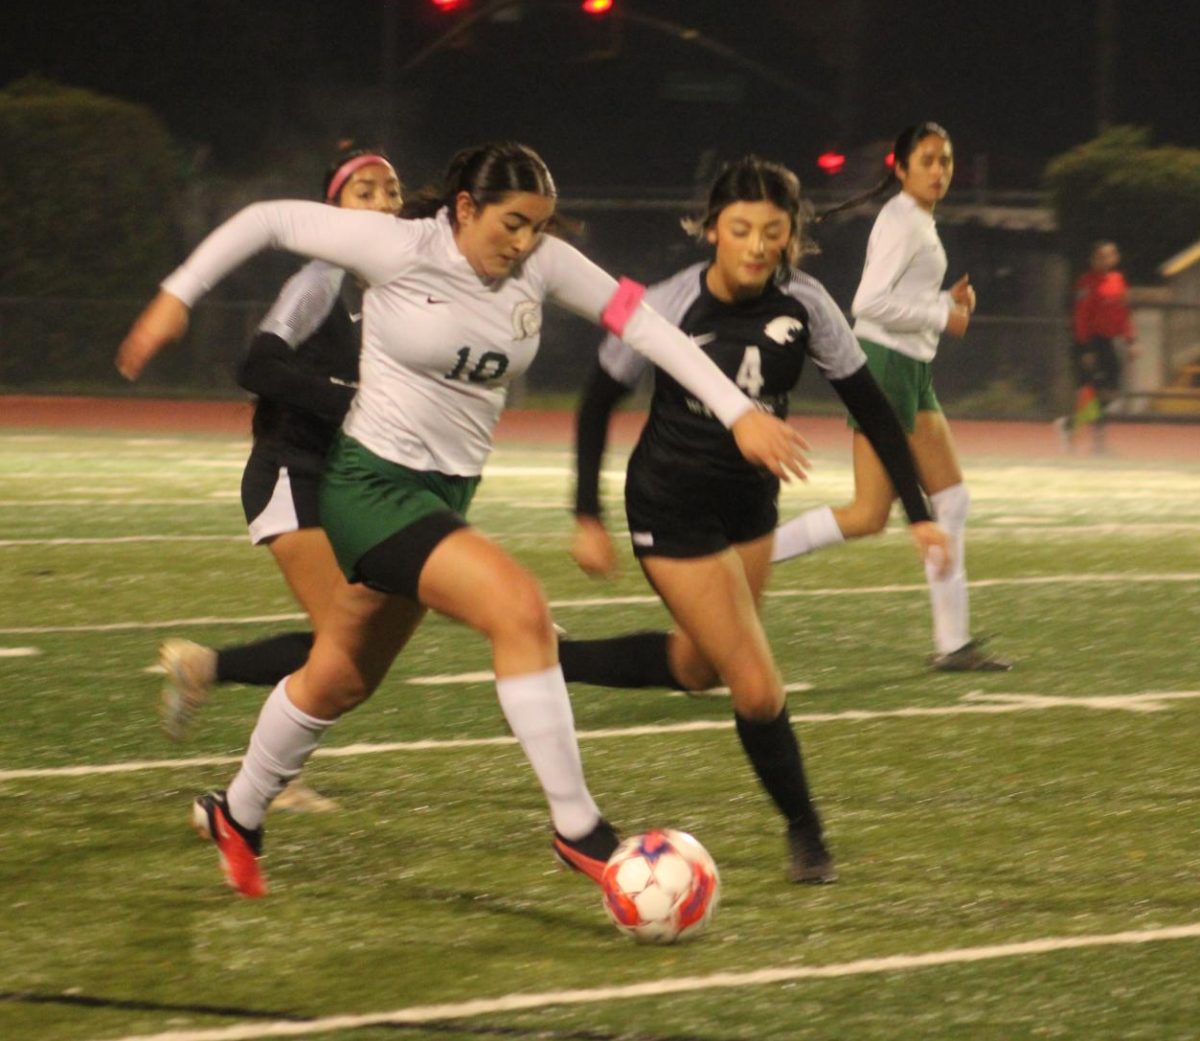 In an intense match against Watsonville, senior captain Aileen Cardenas beats her opponent and carries the ball to the offense. The Trojans lost the fight with a final score of 2-0. “Soccer means a lot to me and I always try to play with the best of my effort. I understand there are times I do make mistakes but I try to see those mistakes as a way to learn,” Cardenas said. “Throughout the sport, there’s a lot of challenges you’re going to face, so just don’t let it get to you mentally.” 
